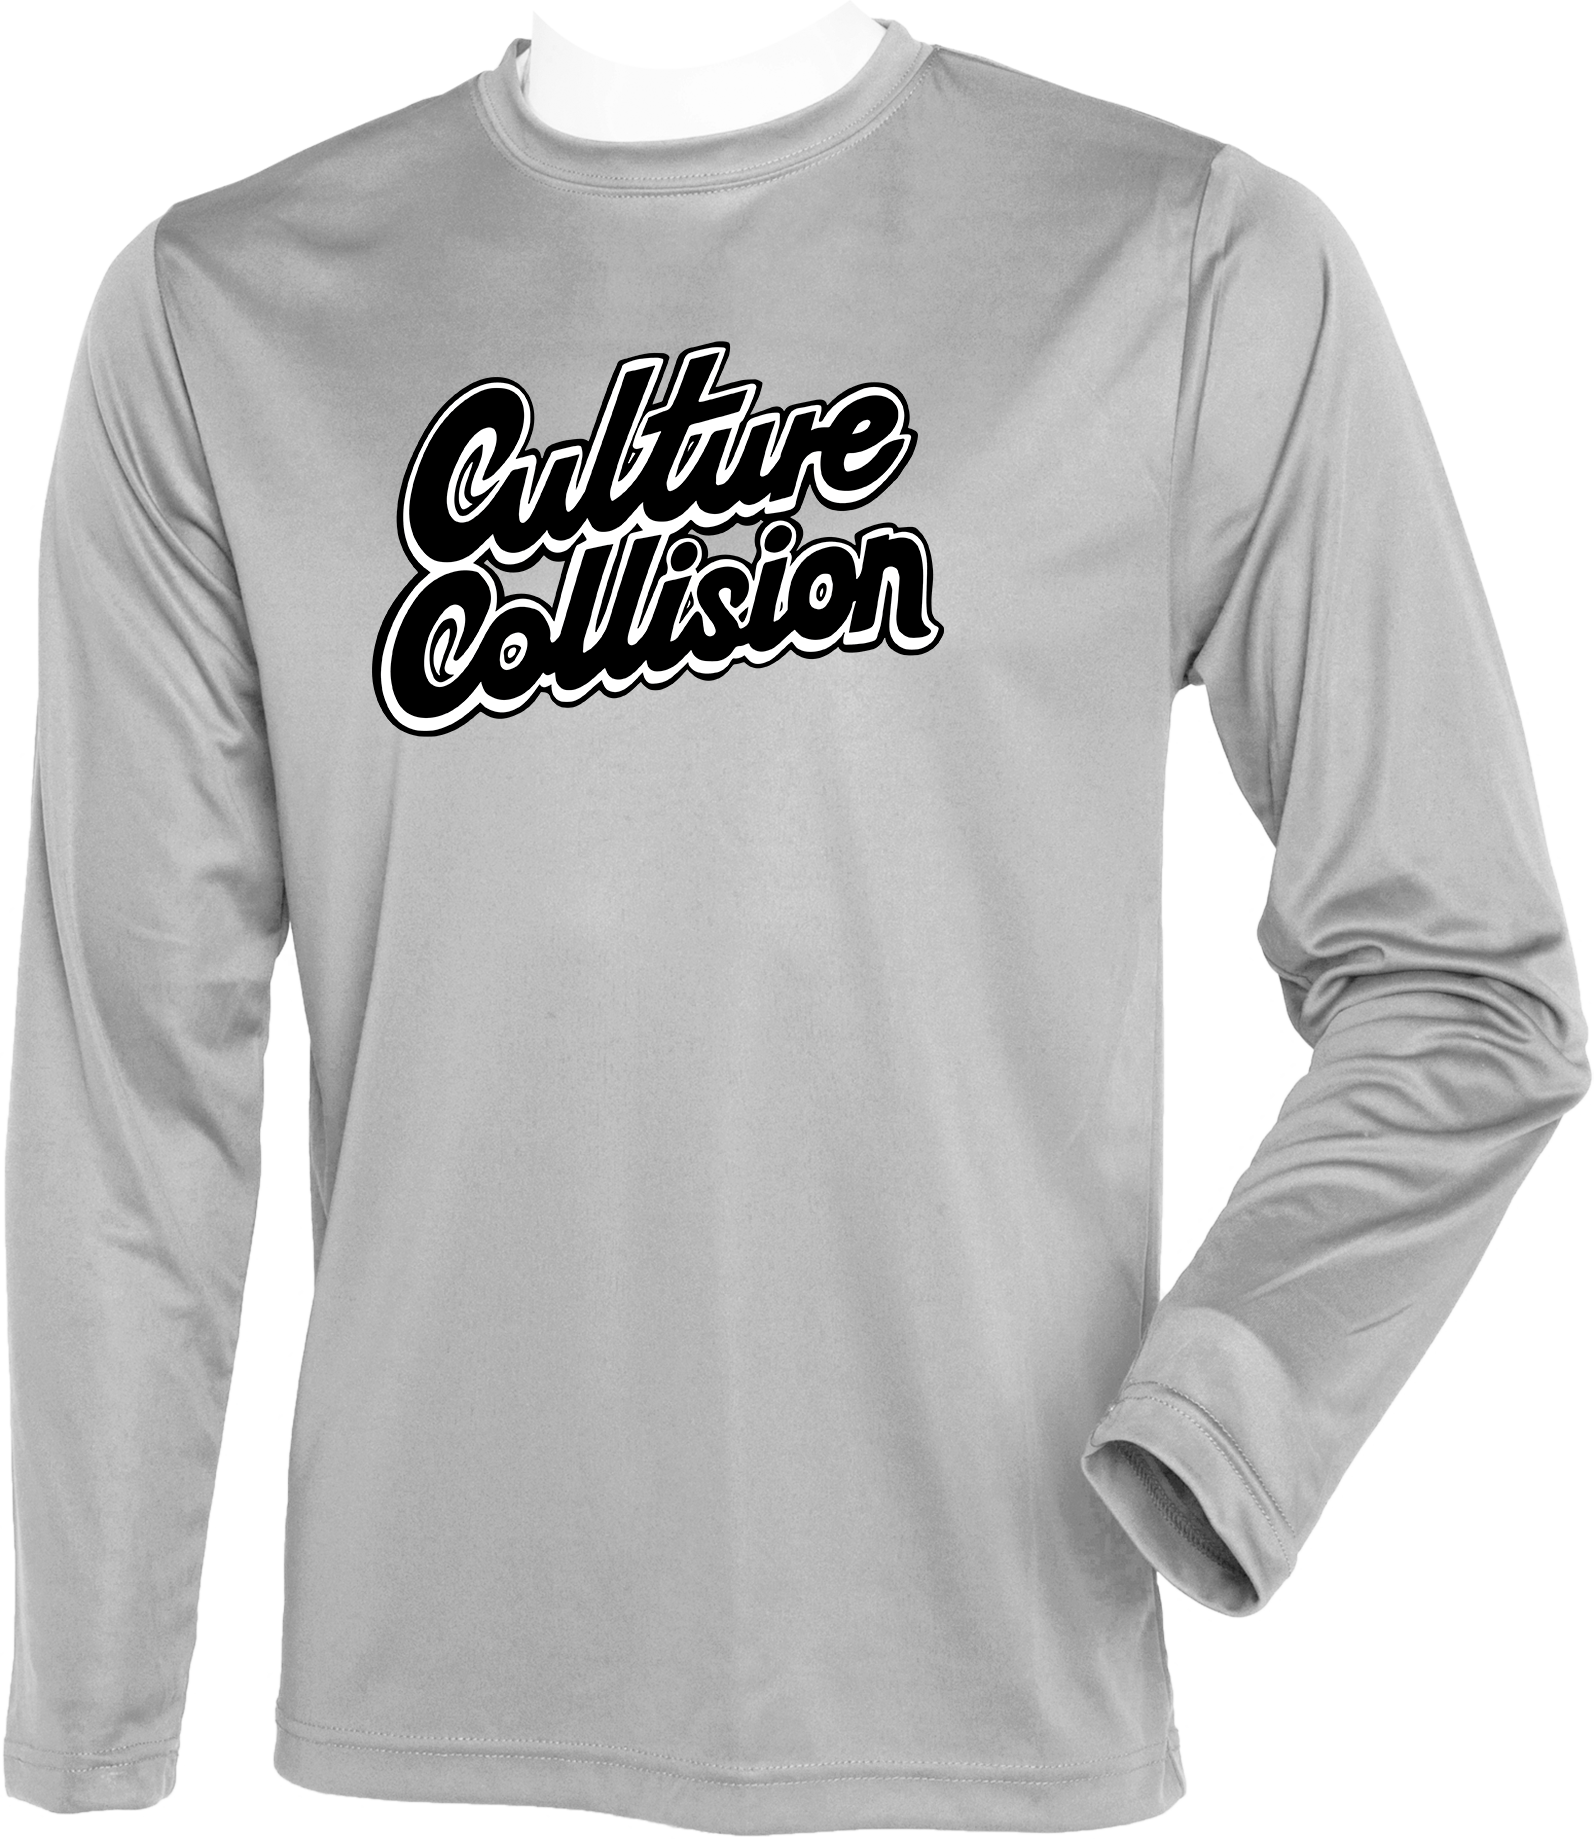 PERFORMANCE SHIRTS - 2023 Culture Collision